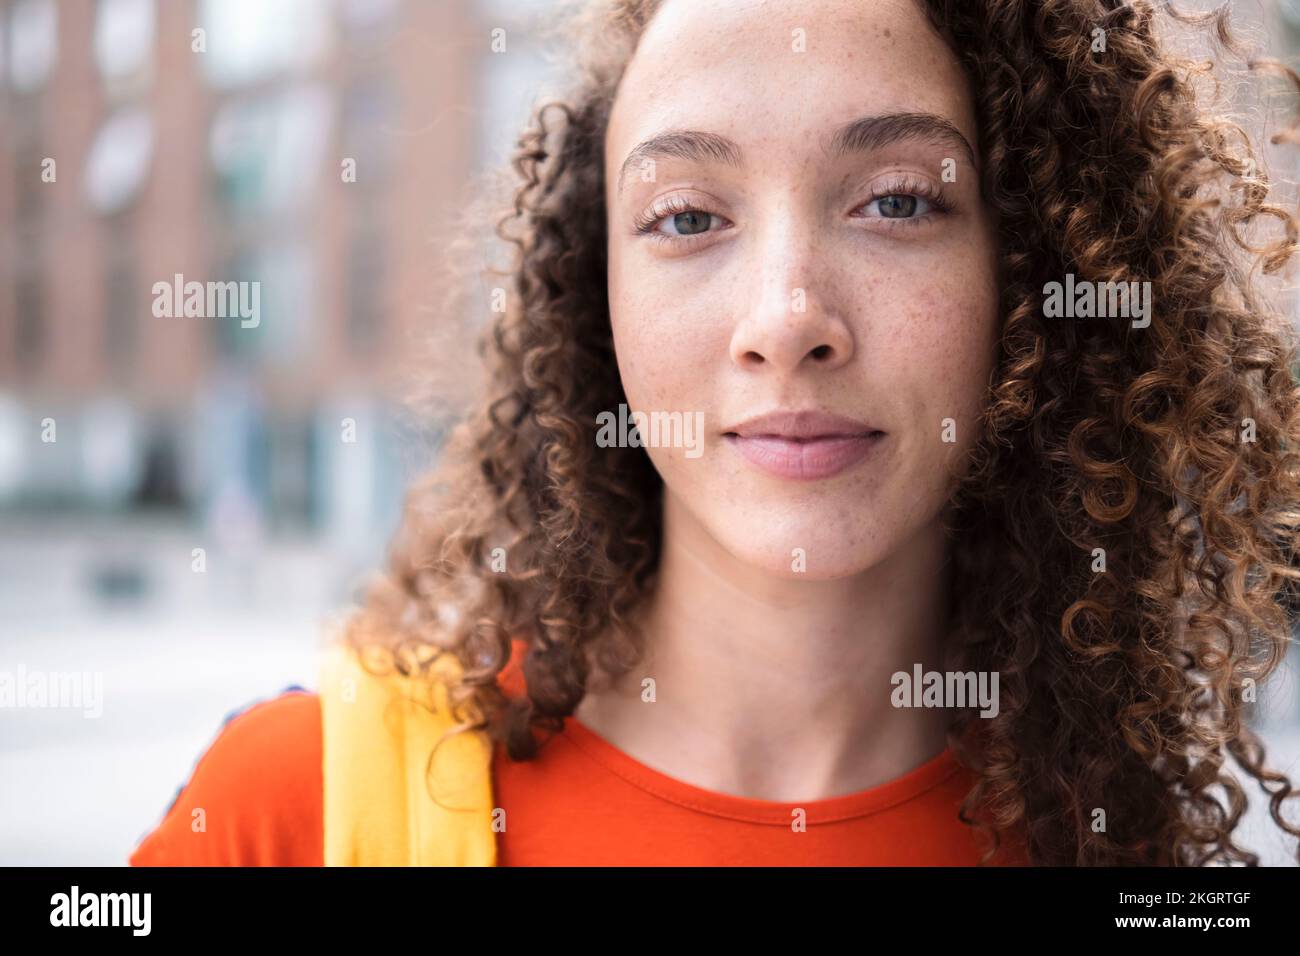 Brunette young woman with curly hair Stock Photo